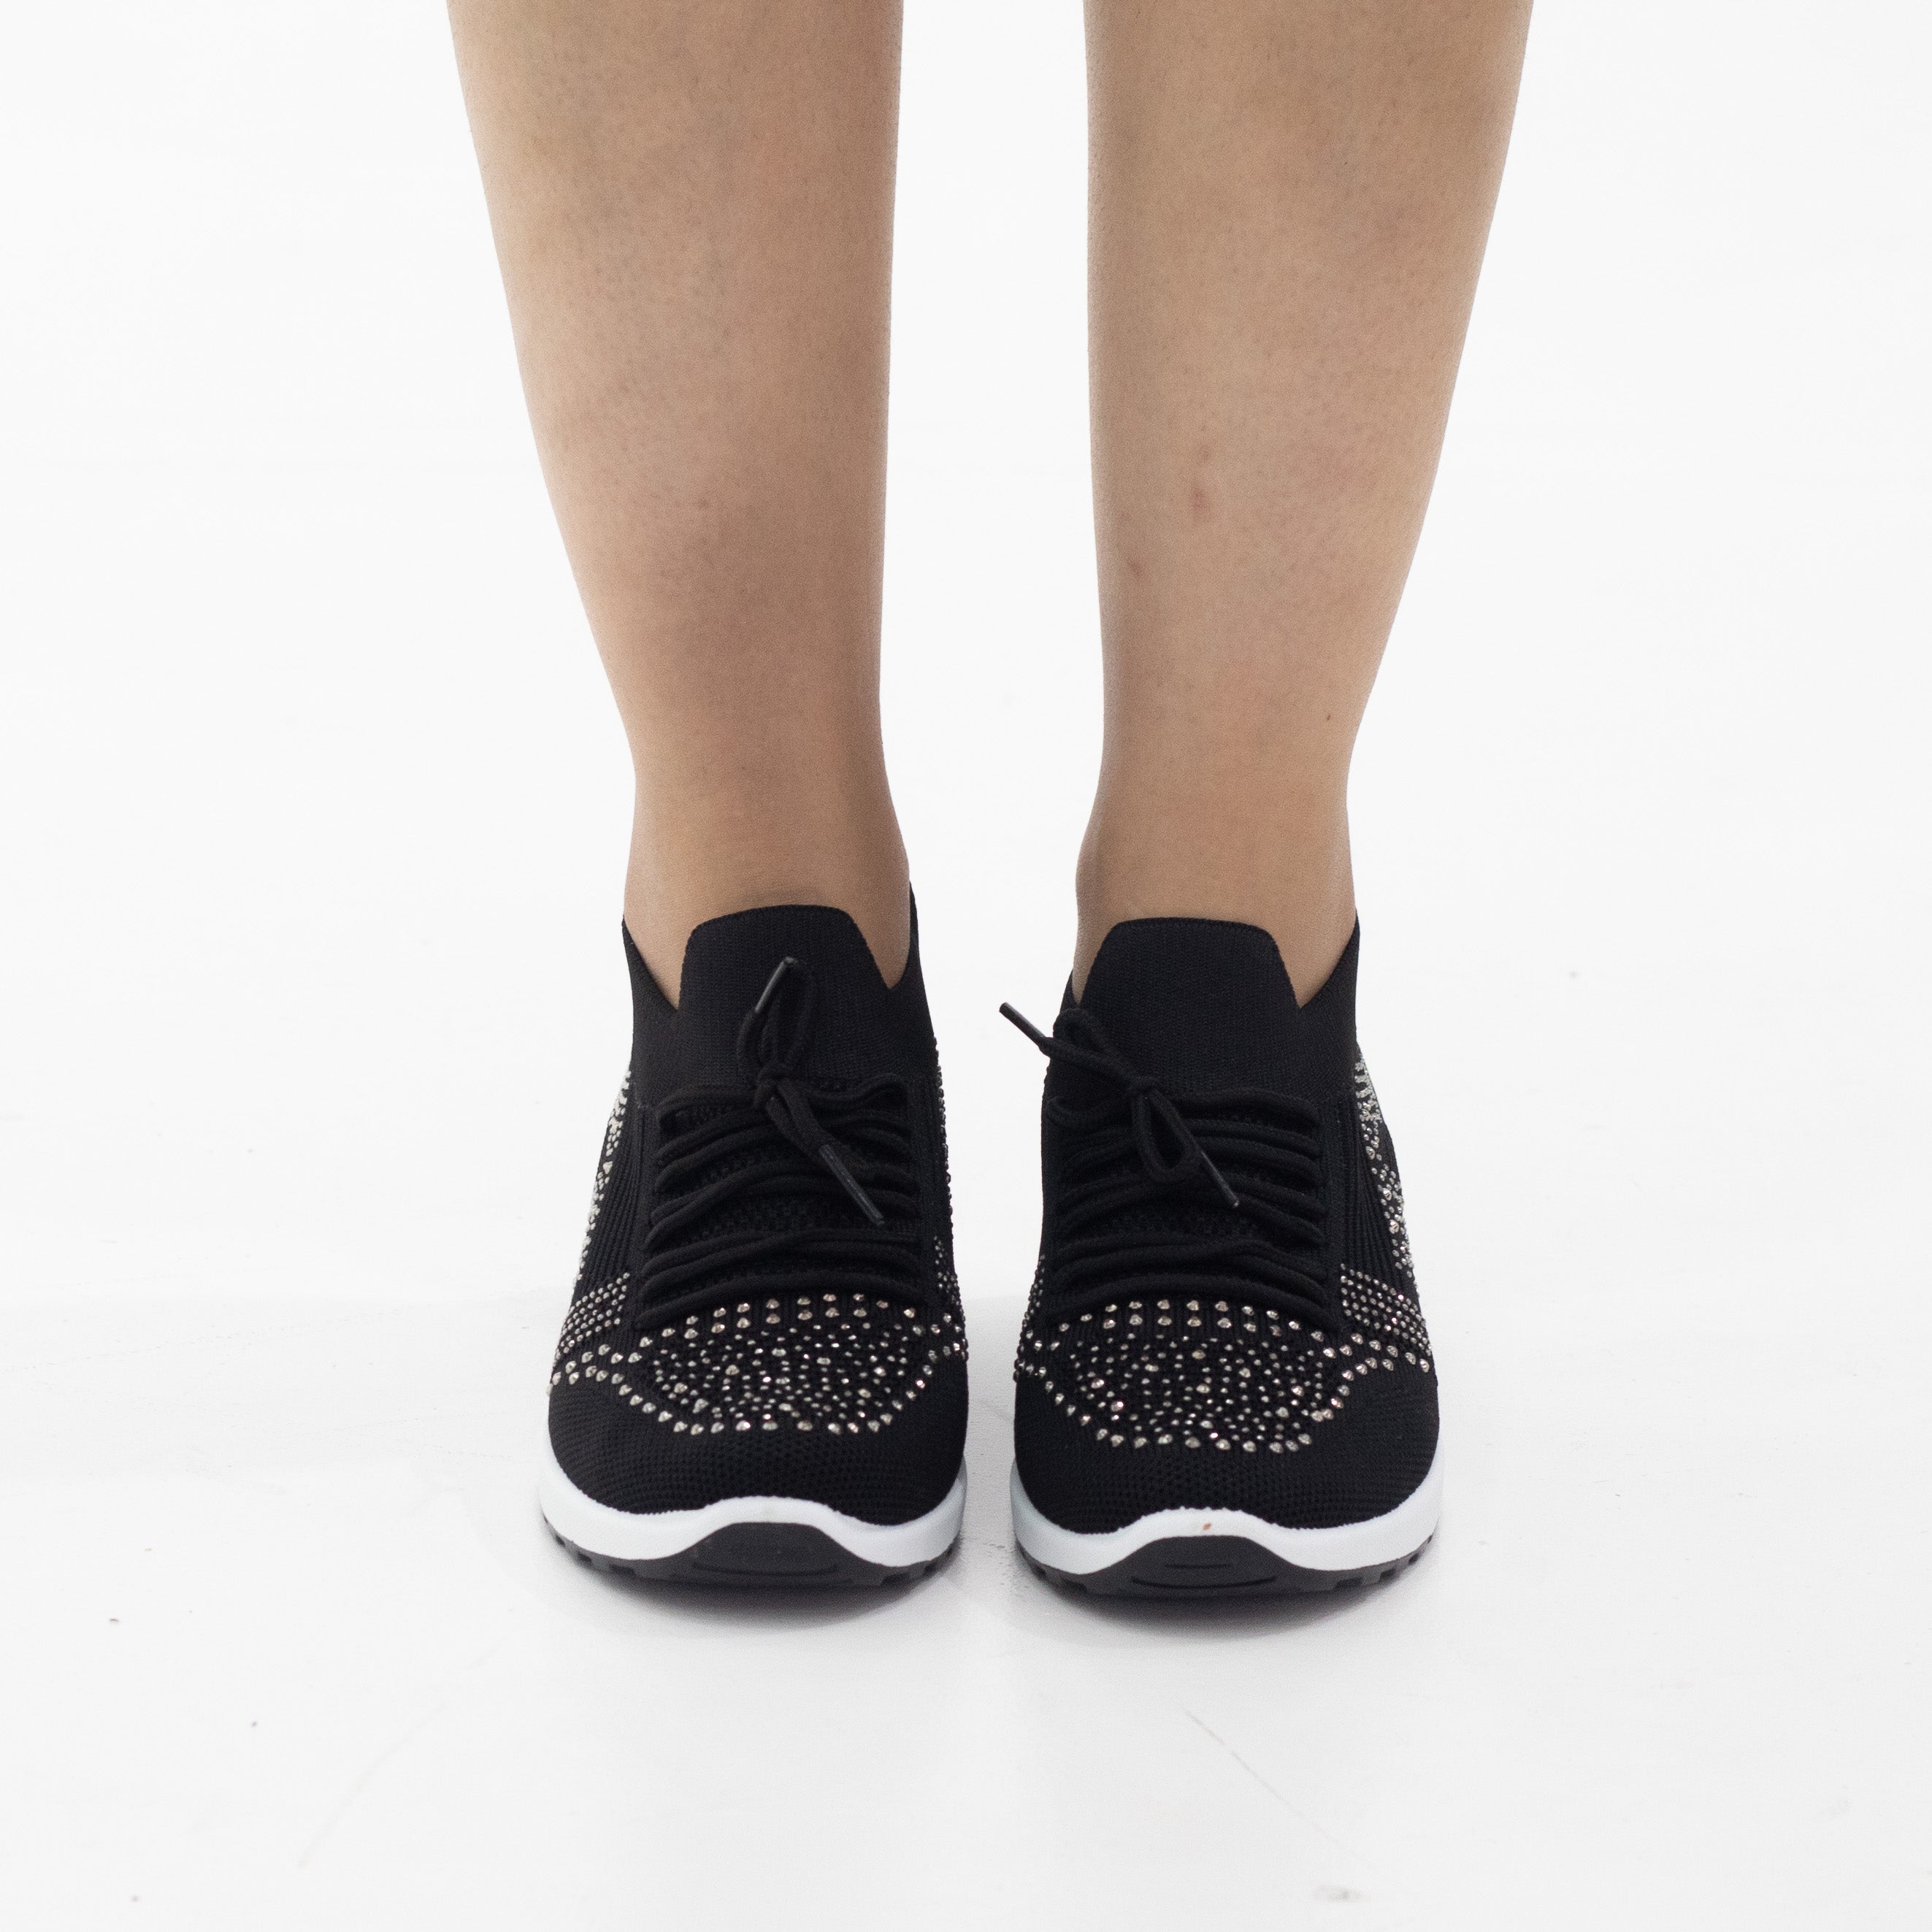 Black fly knit lace up sneaker with diamonds obioma